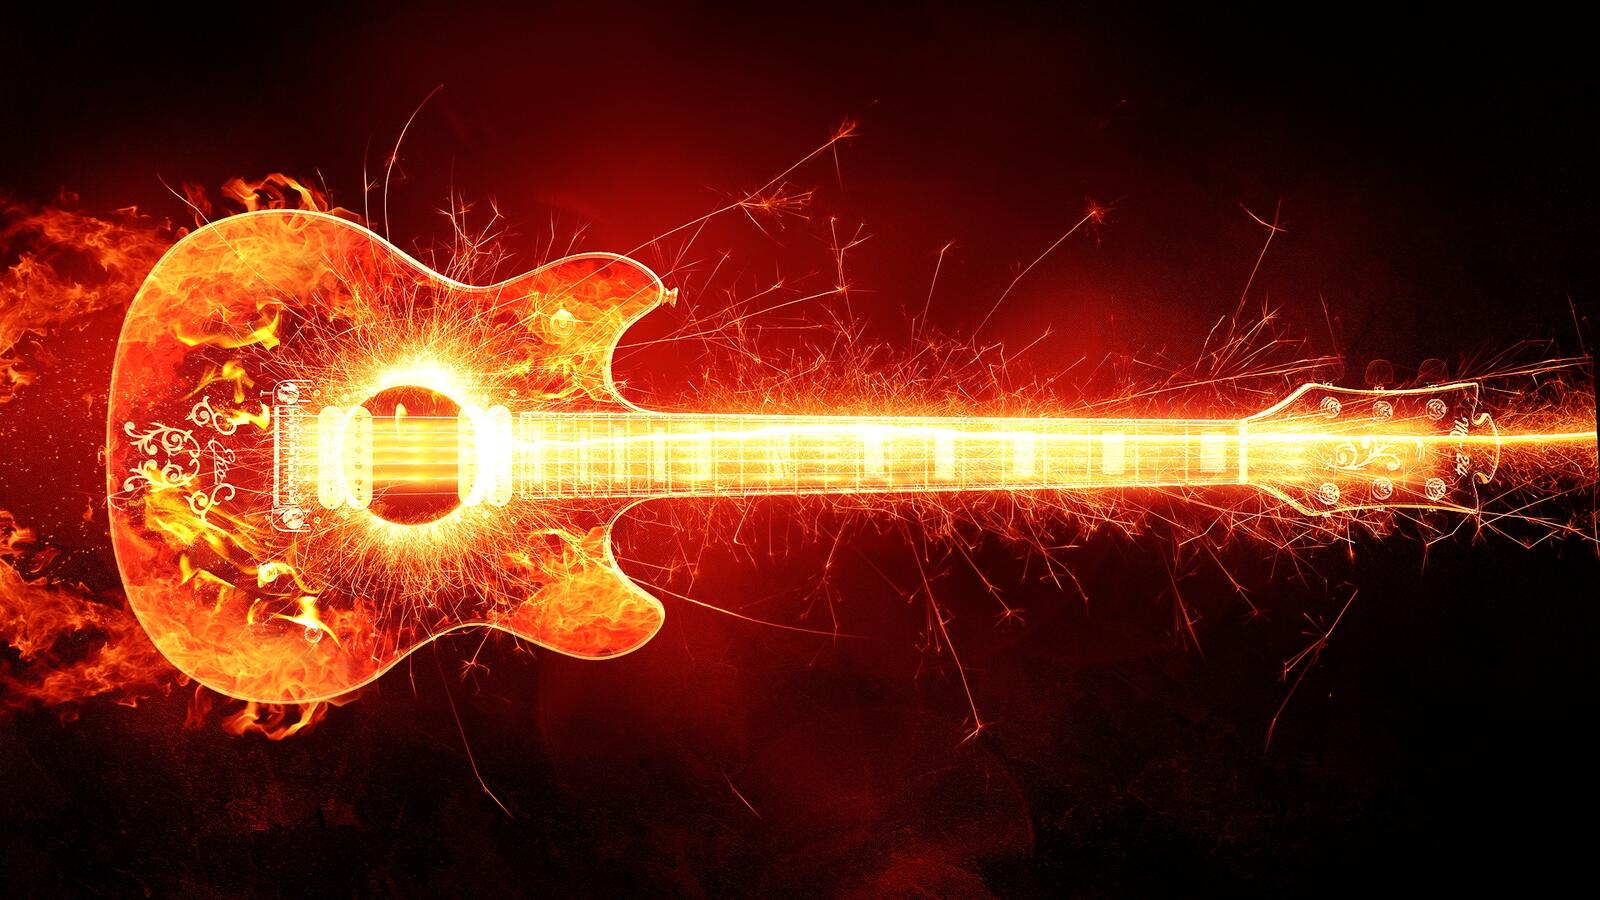 Free photo A picture of a fiery guitar